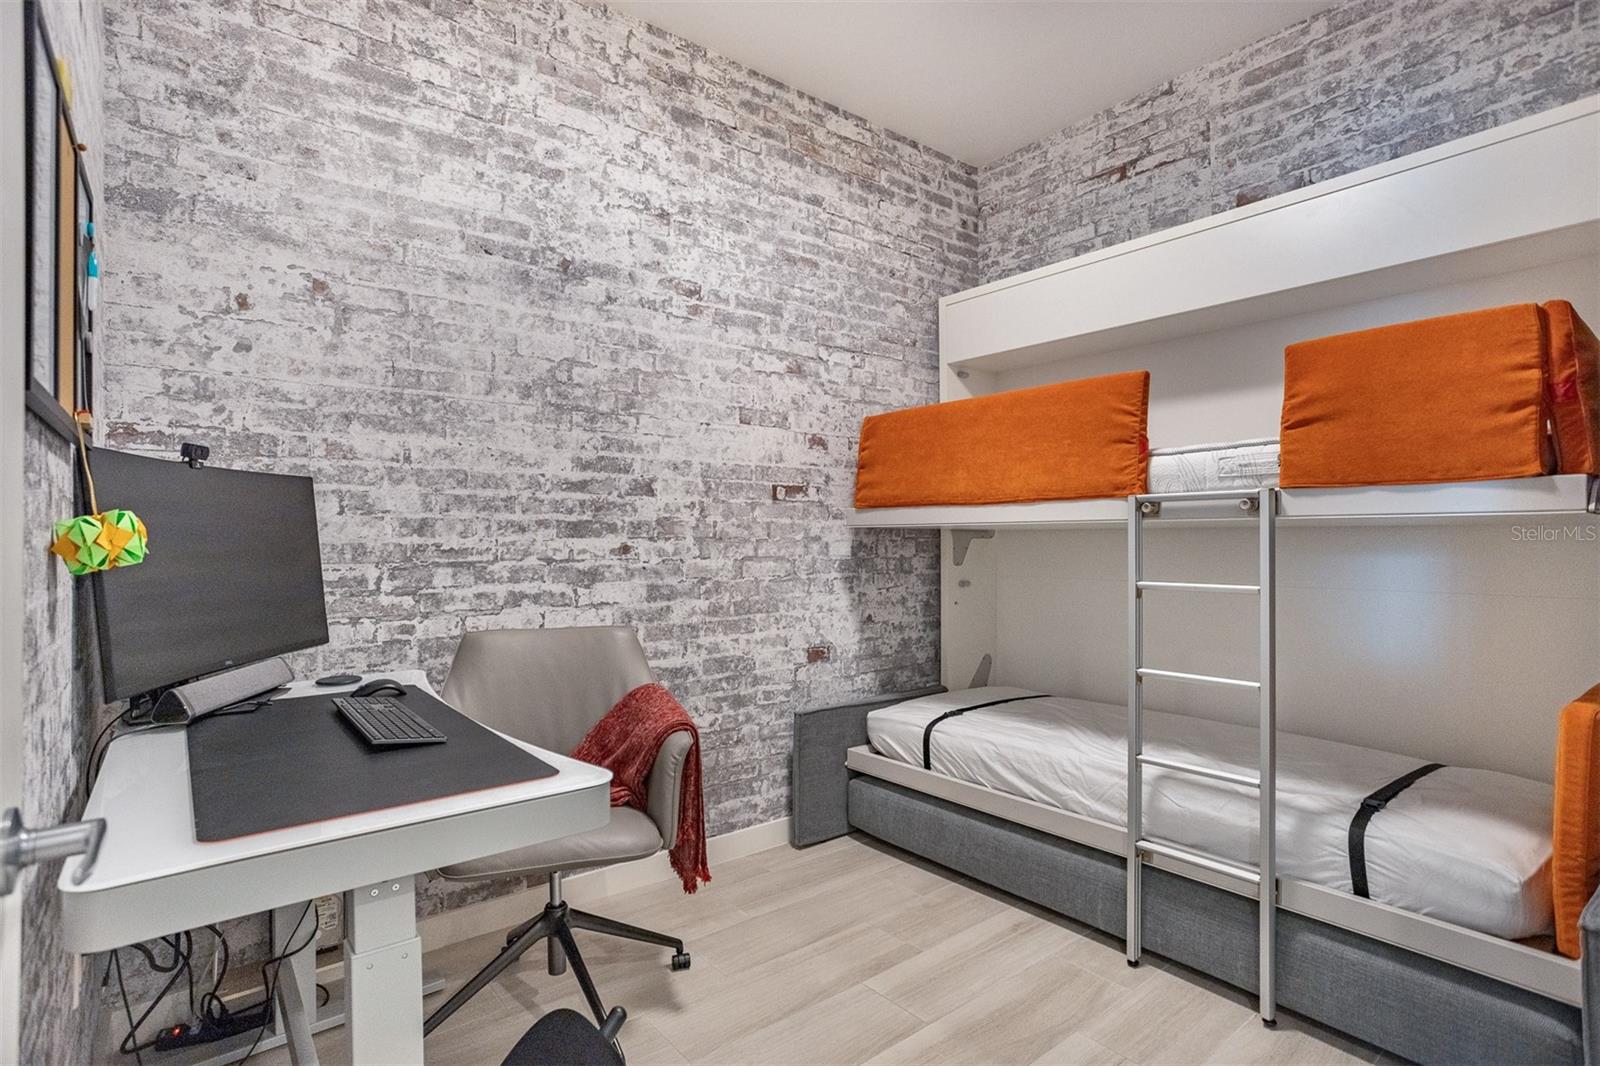 Surprise! This bonus room sleeps two with these luxurious bunk beds